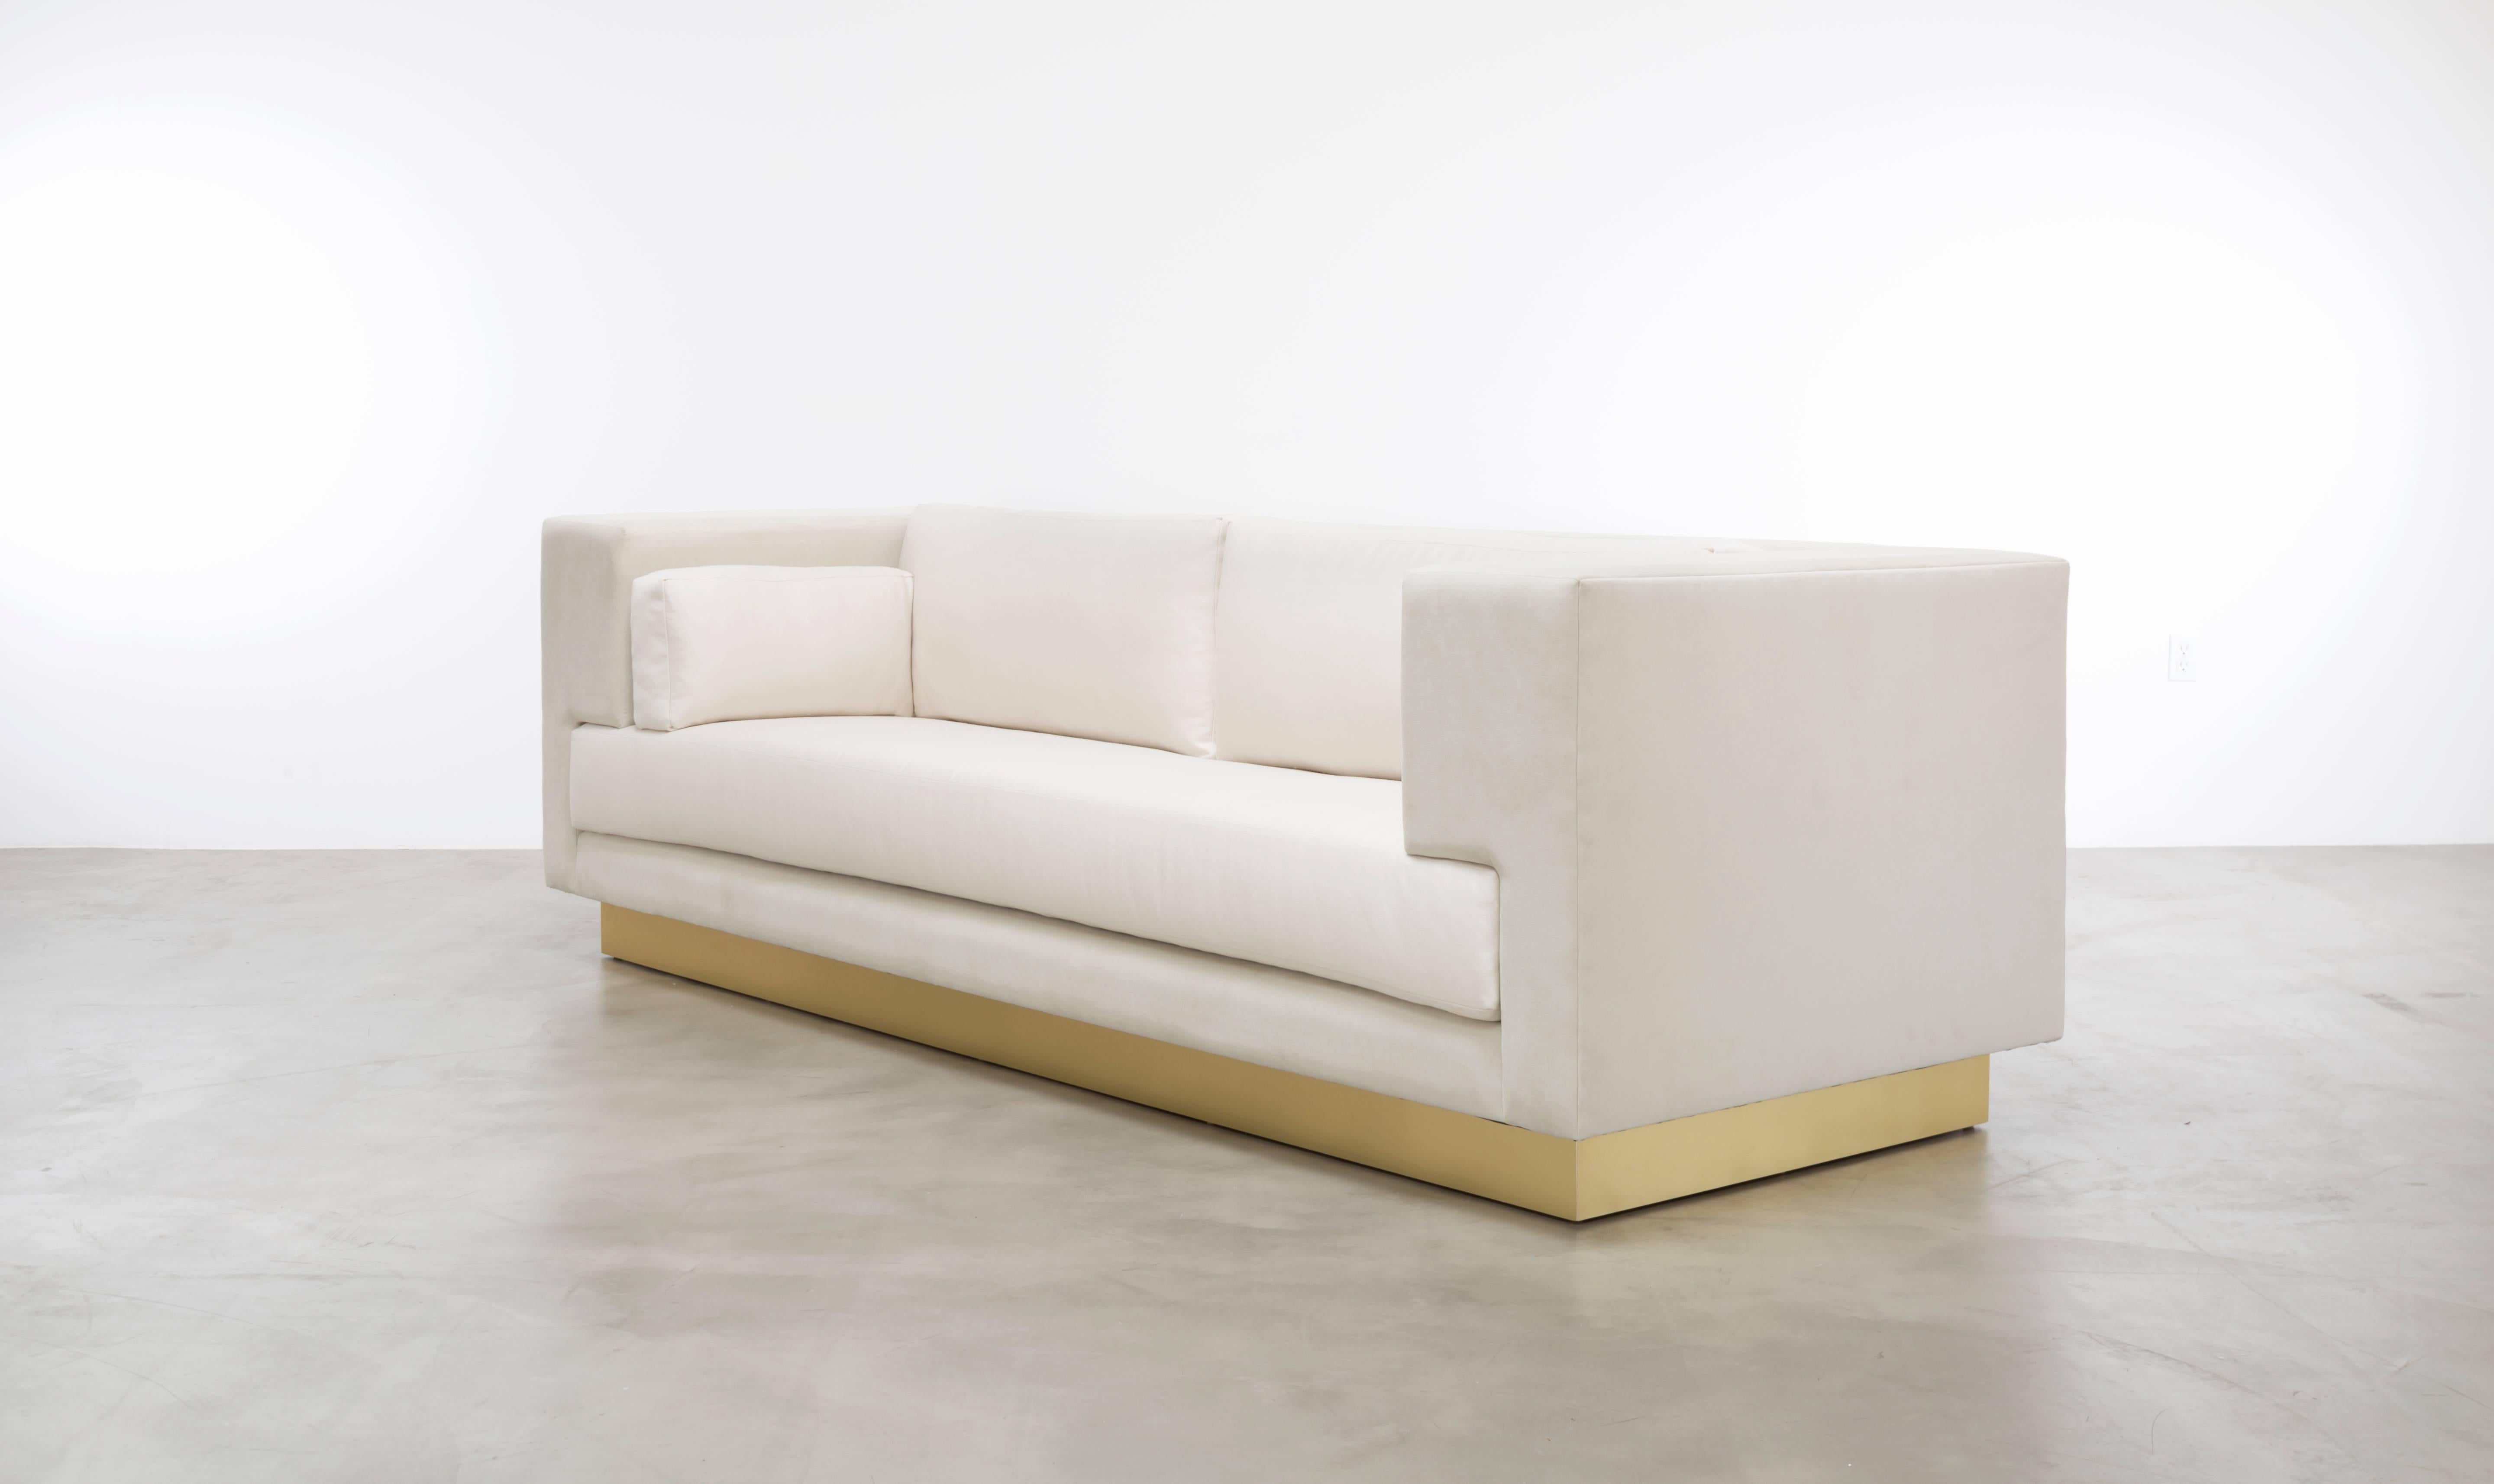 The Lacroix Sofa is a meticulously crafted piece of furniture designed to provide both comfort and a sleek, modern aesthetic. It boasts a unique plinth cushion along with back and arm pillows, which collectively form a minimalistic yet luxurious